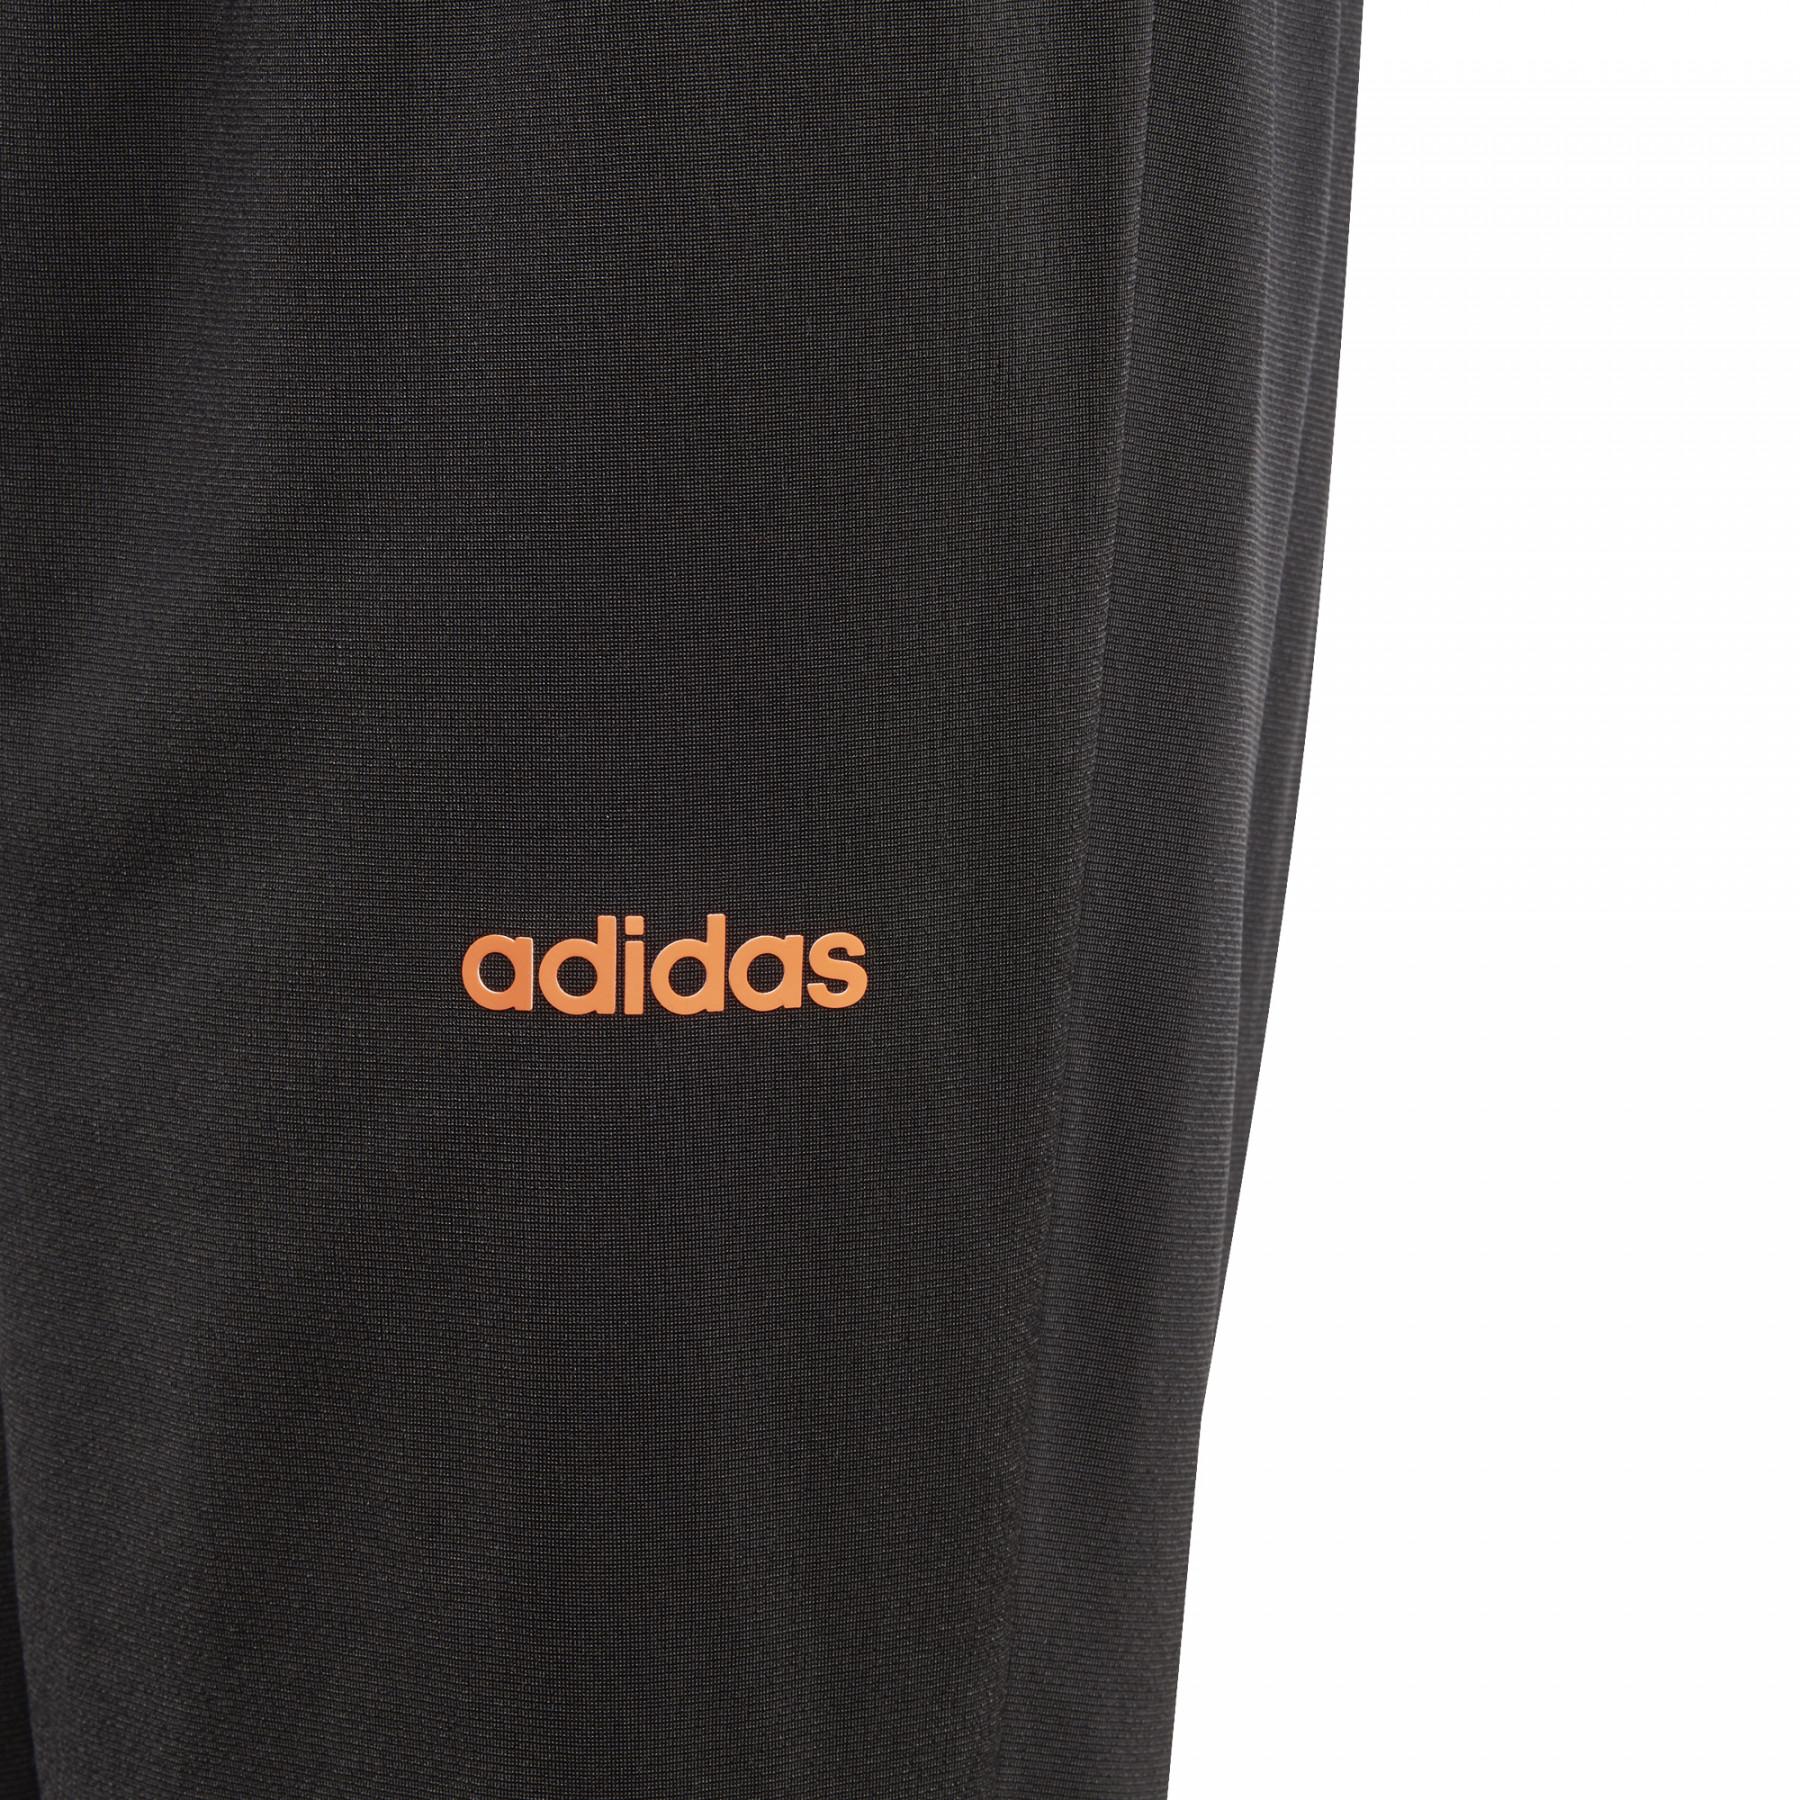 Children's tracksuit adidas Entry